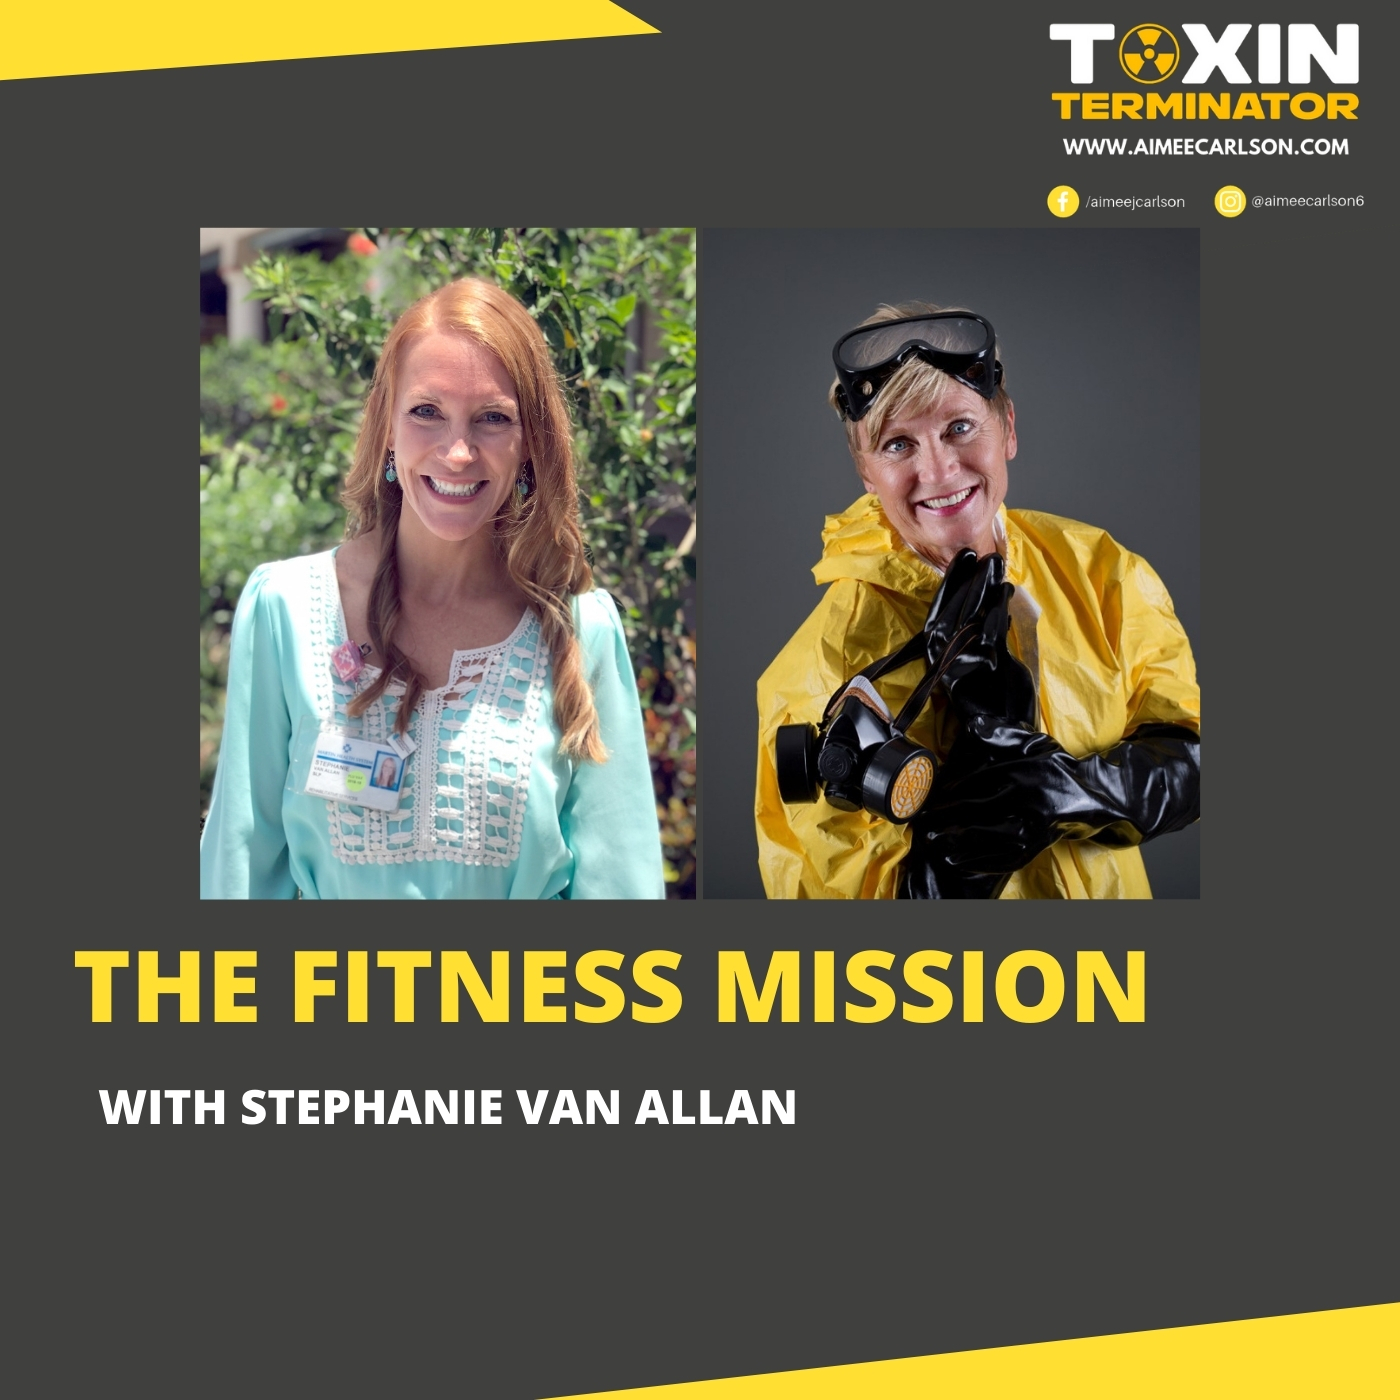 The Fitness Mission with Stephanie Van Allan